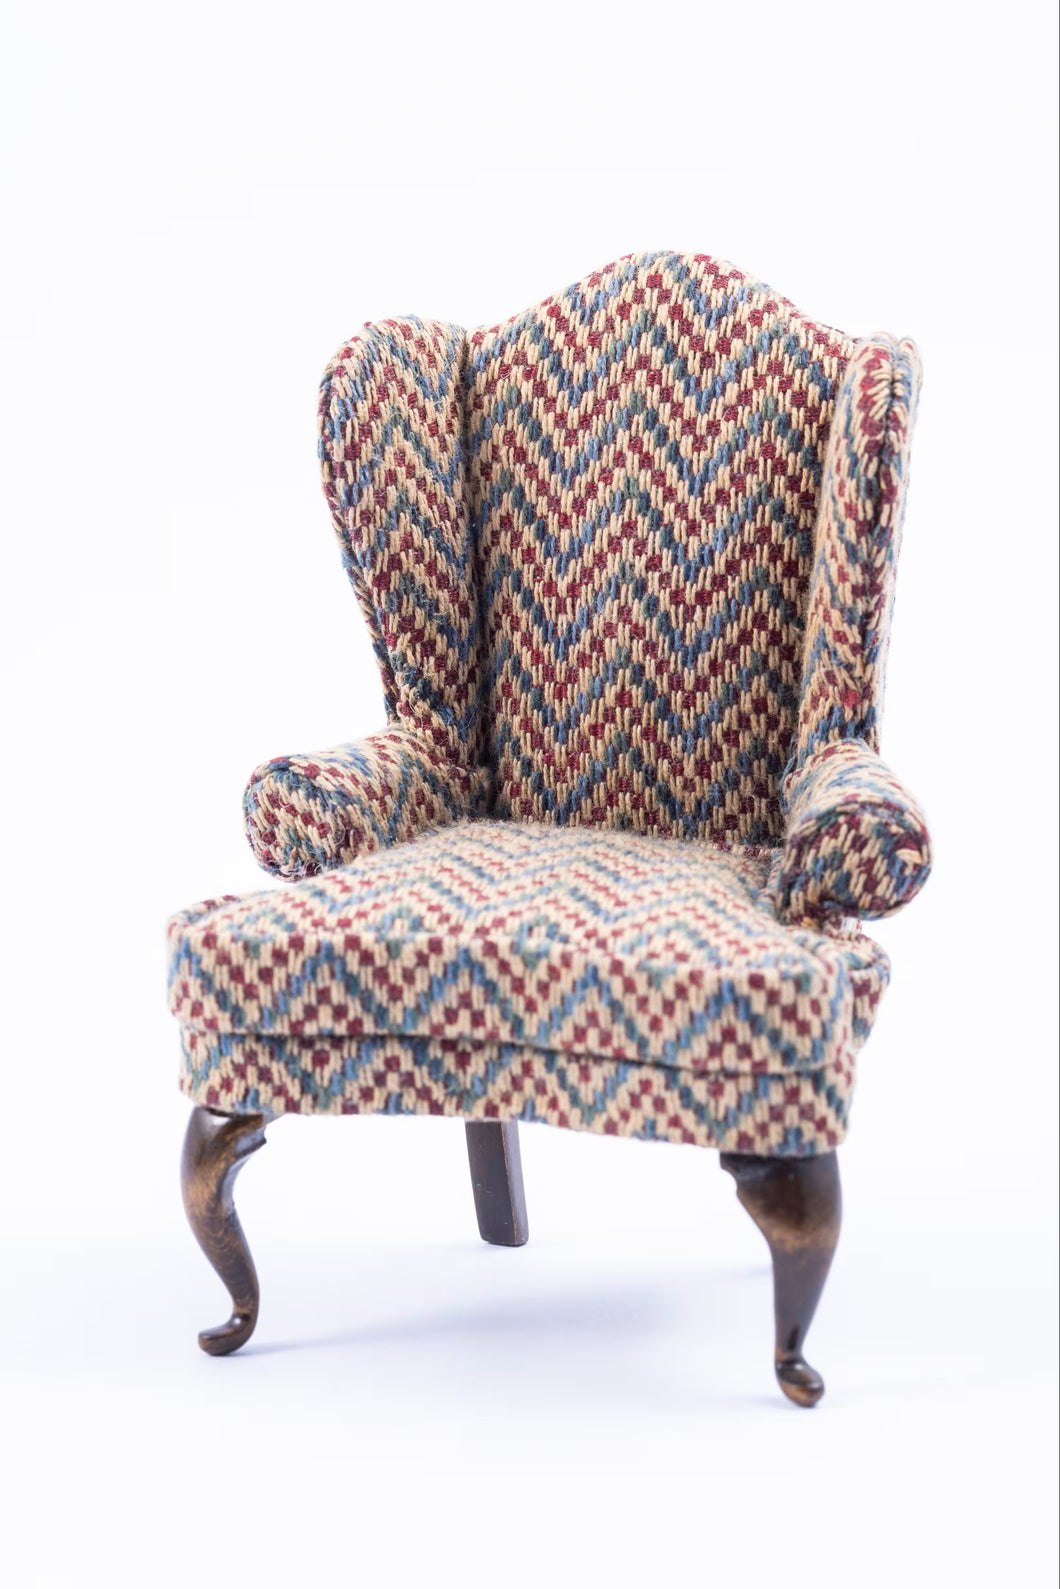 Nellie Belt Upholstered Wing Back Chair - From Estate of Lee Lefkowitz